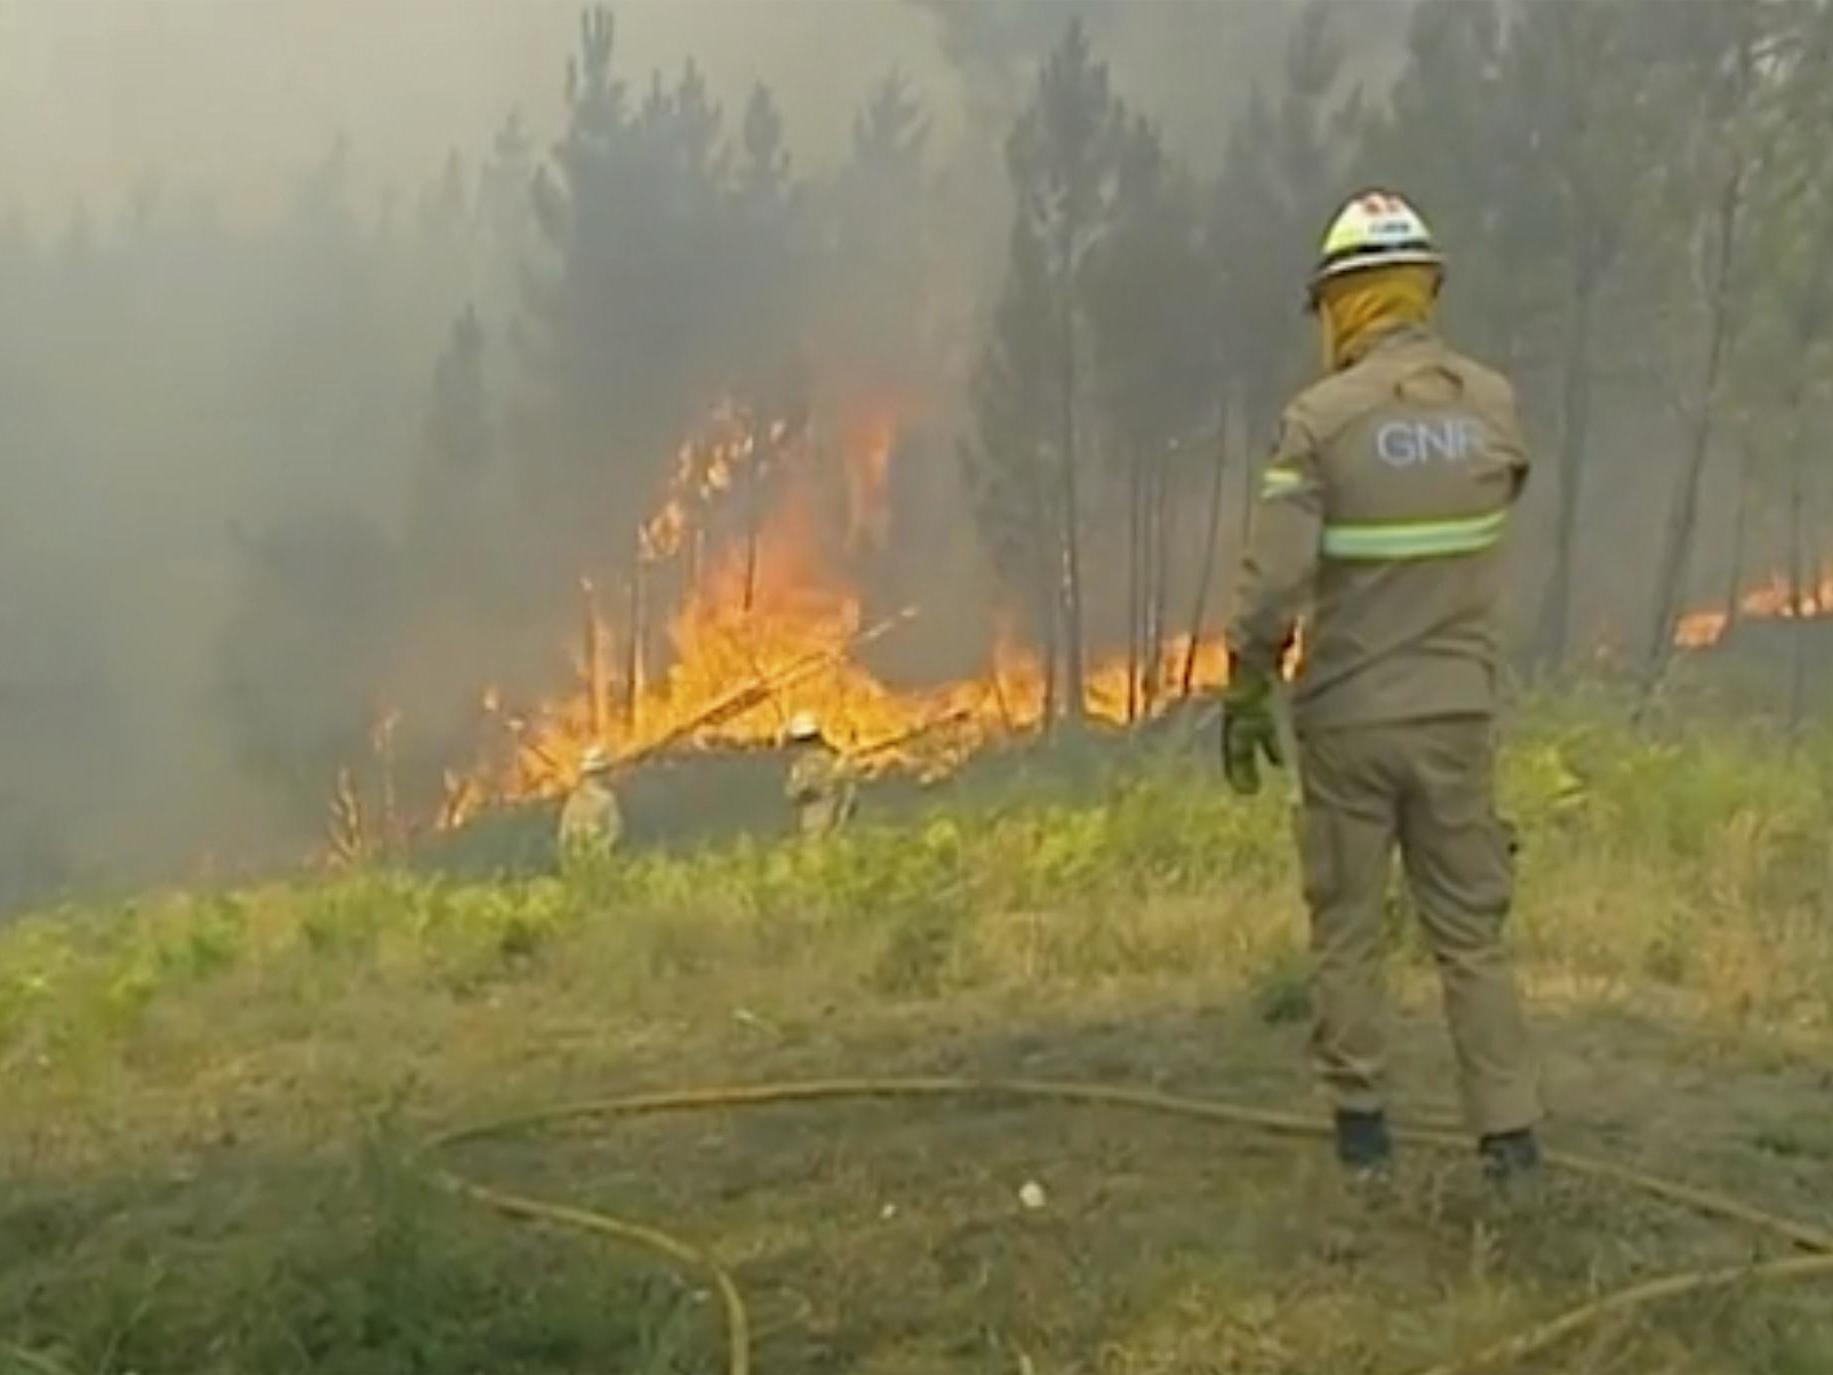 Emergency services try to extinguish the fire in Vila de Rei, Portugal. Portuguese authorities say 1,000 firefighters are working to contain wildfires that have injured eight firefighters and 12 civilians.